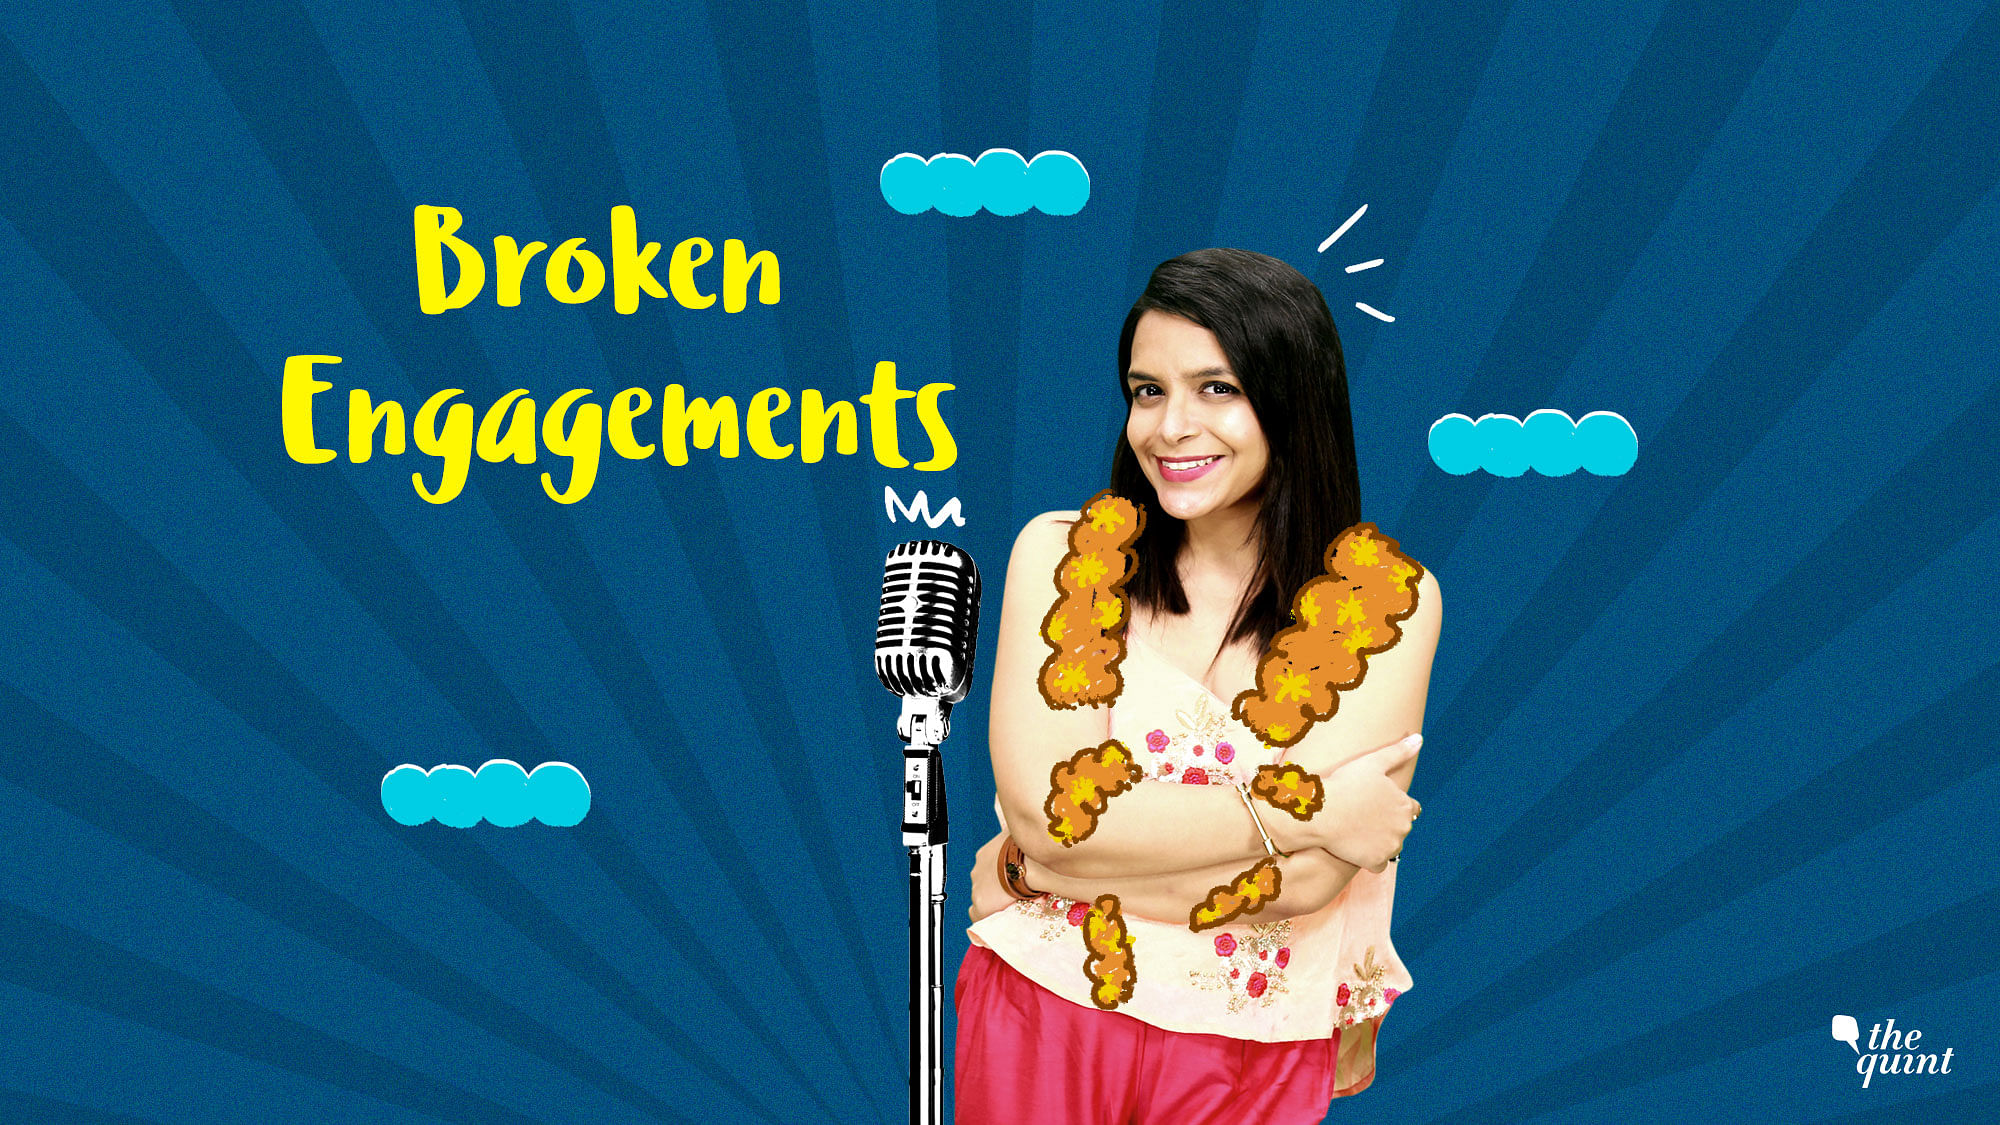 Sigh, broken engagements can be an LIIT of emotions